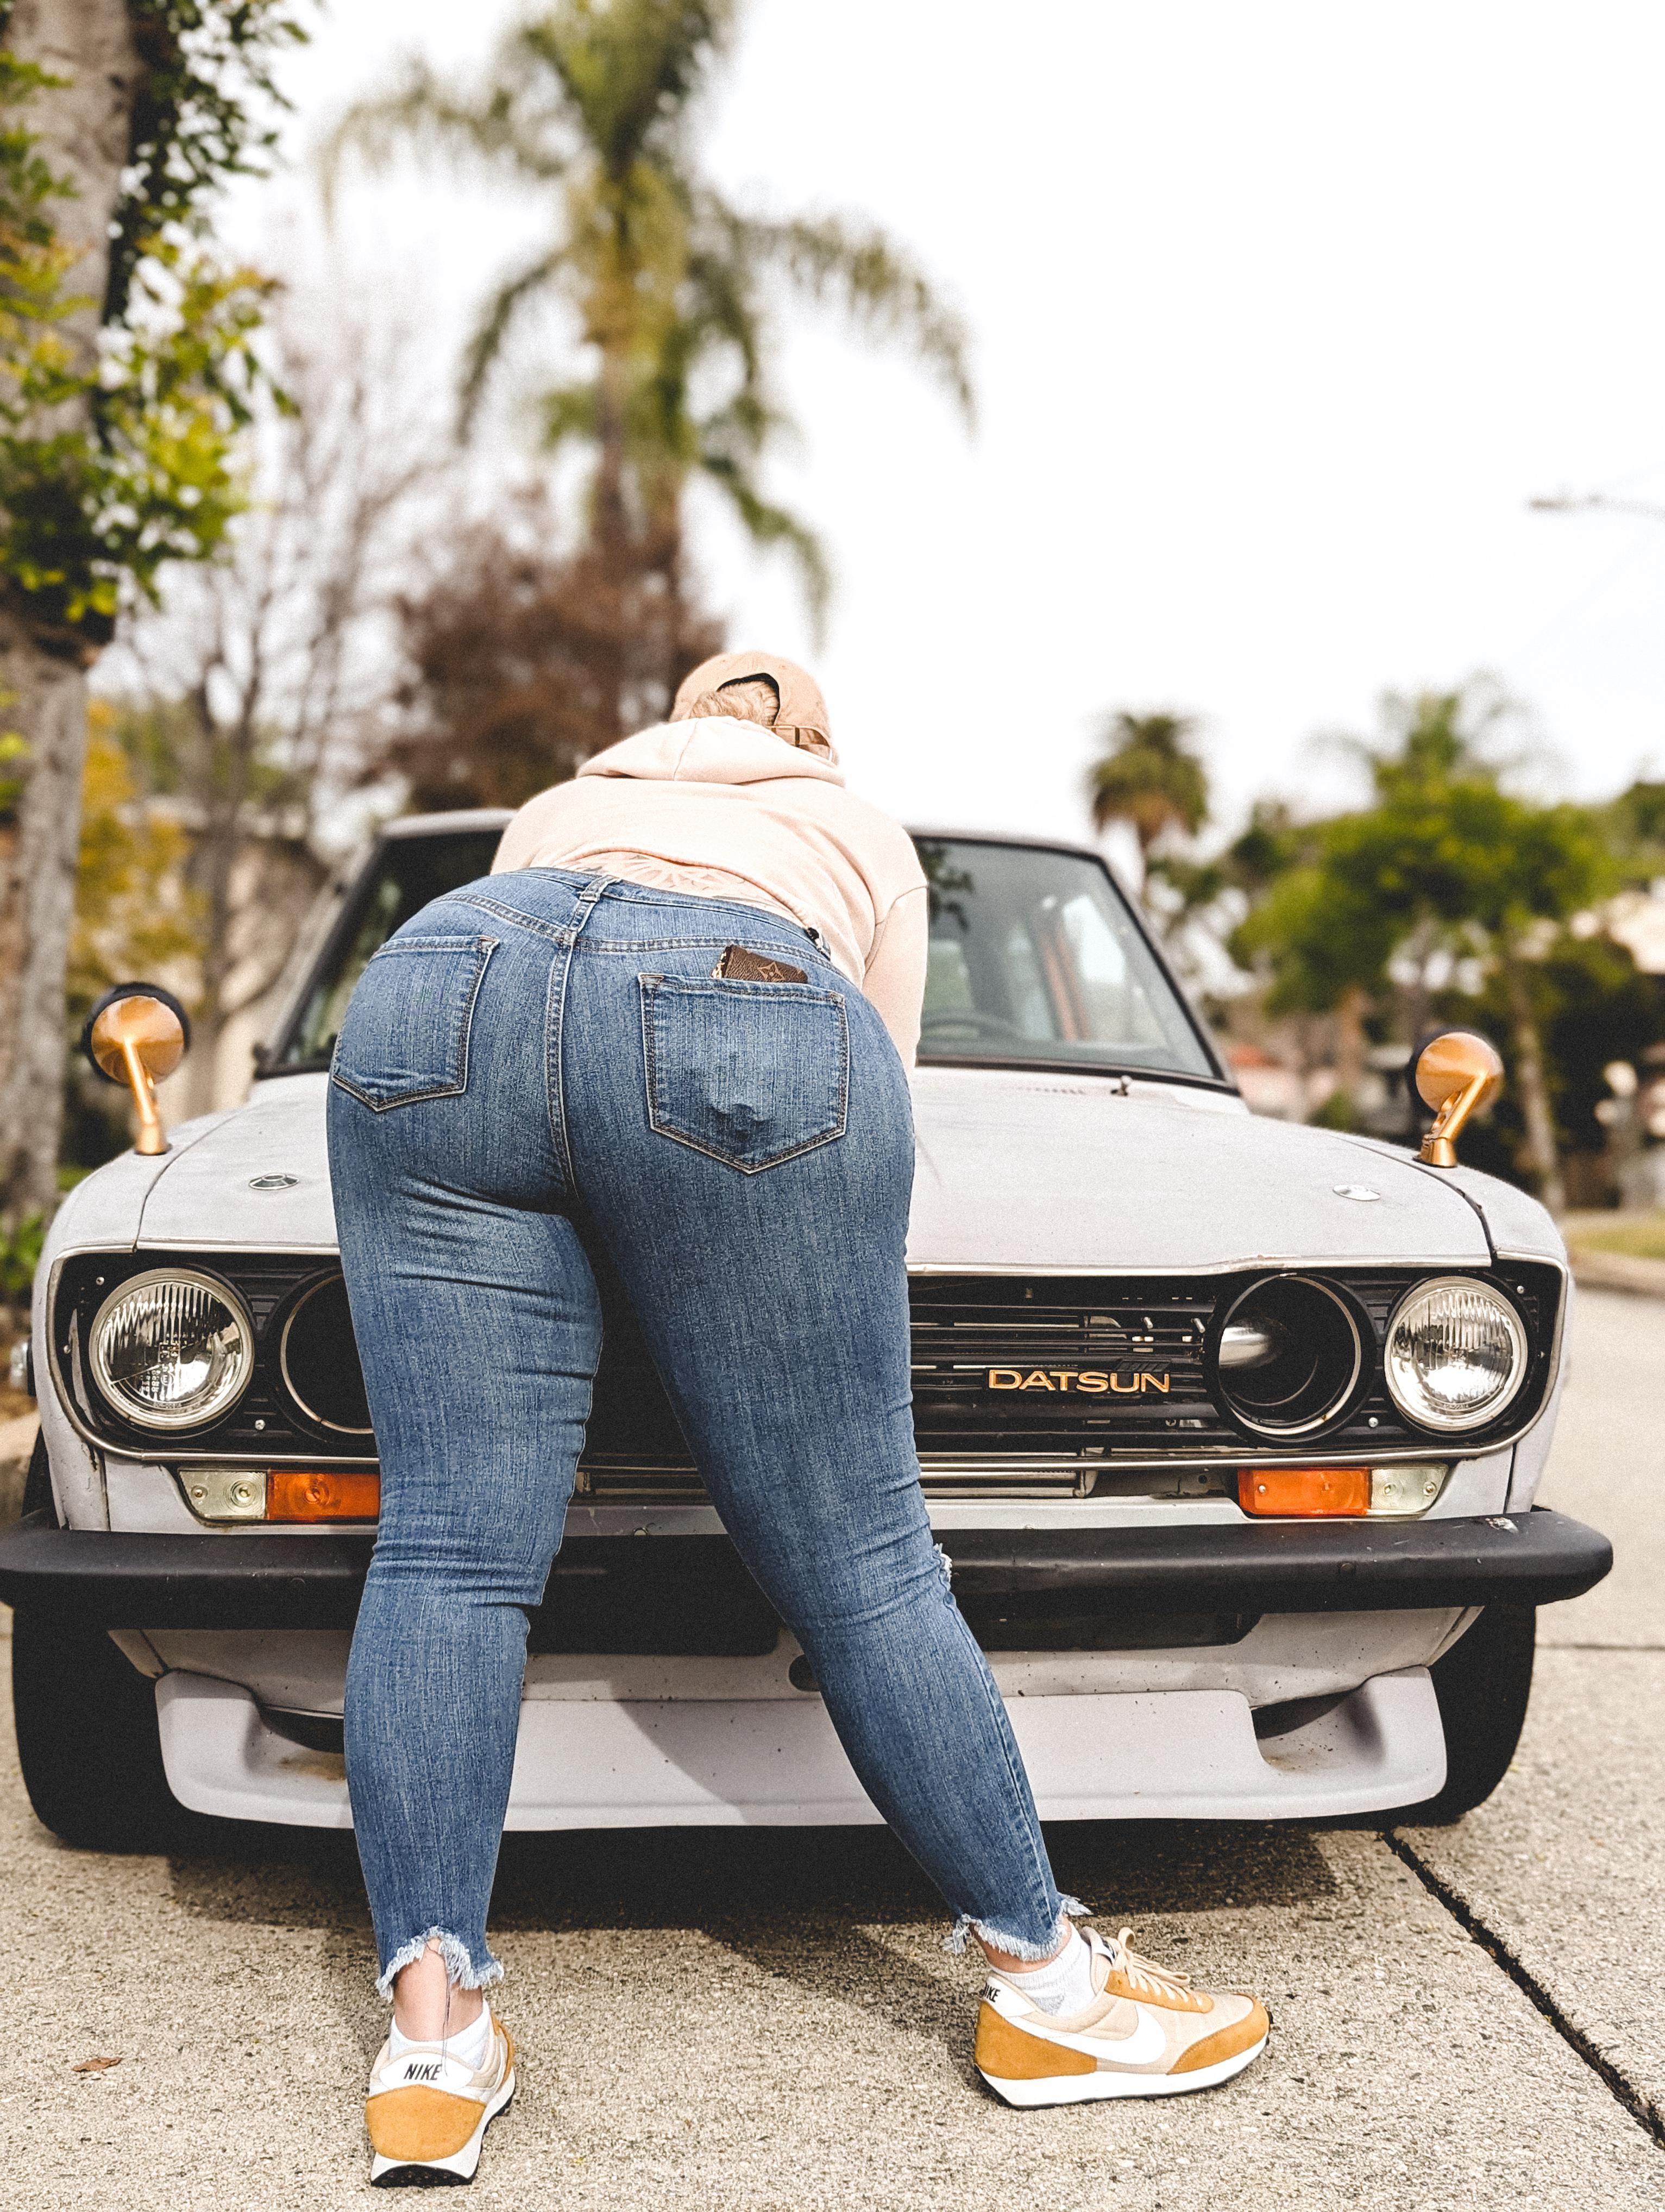 PAWG let me check something under the hood